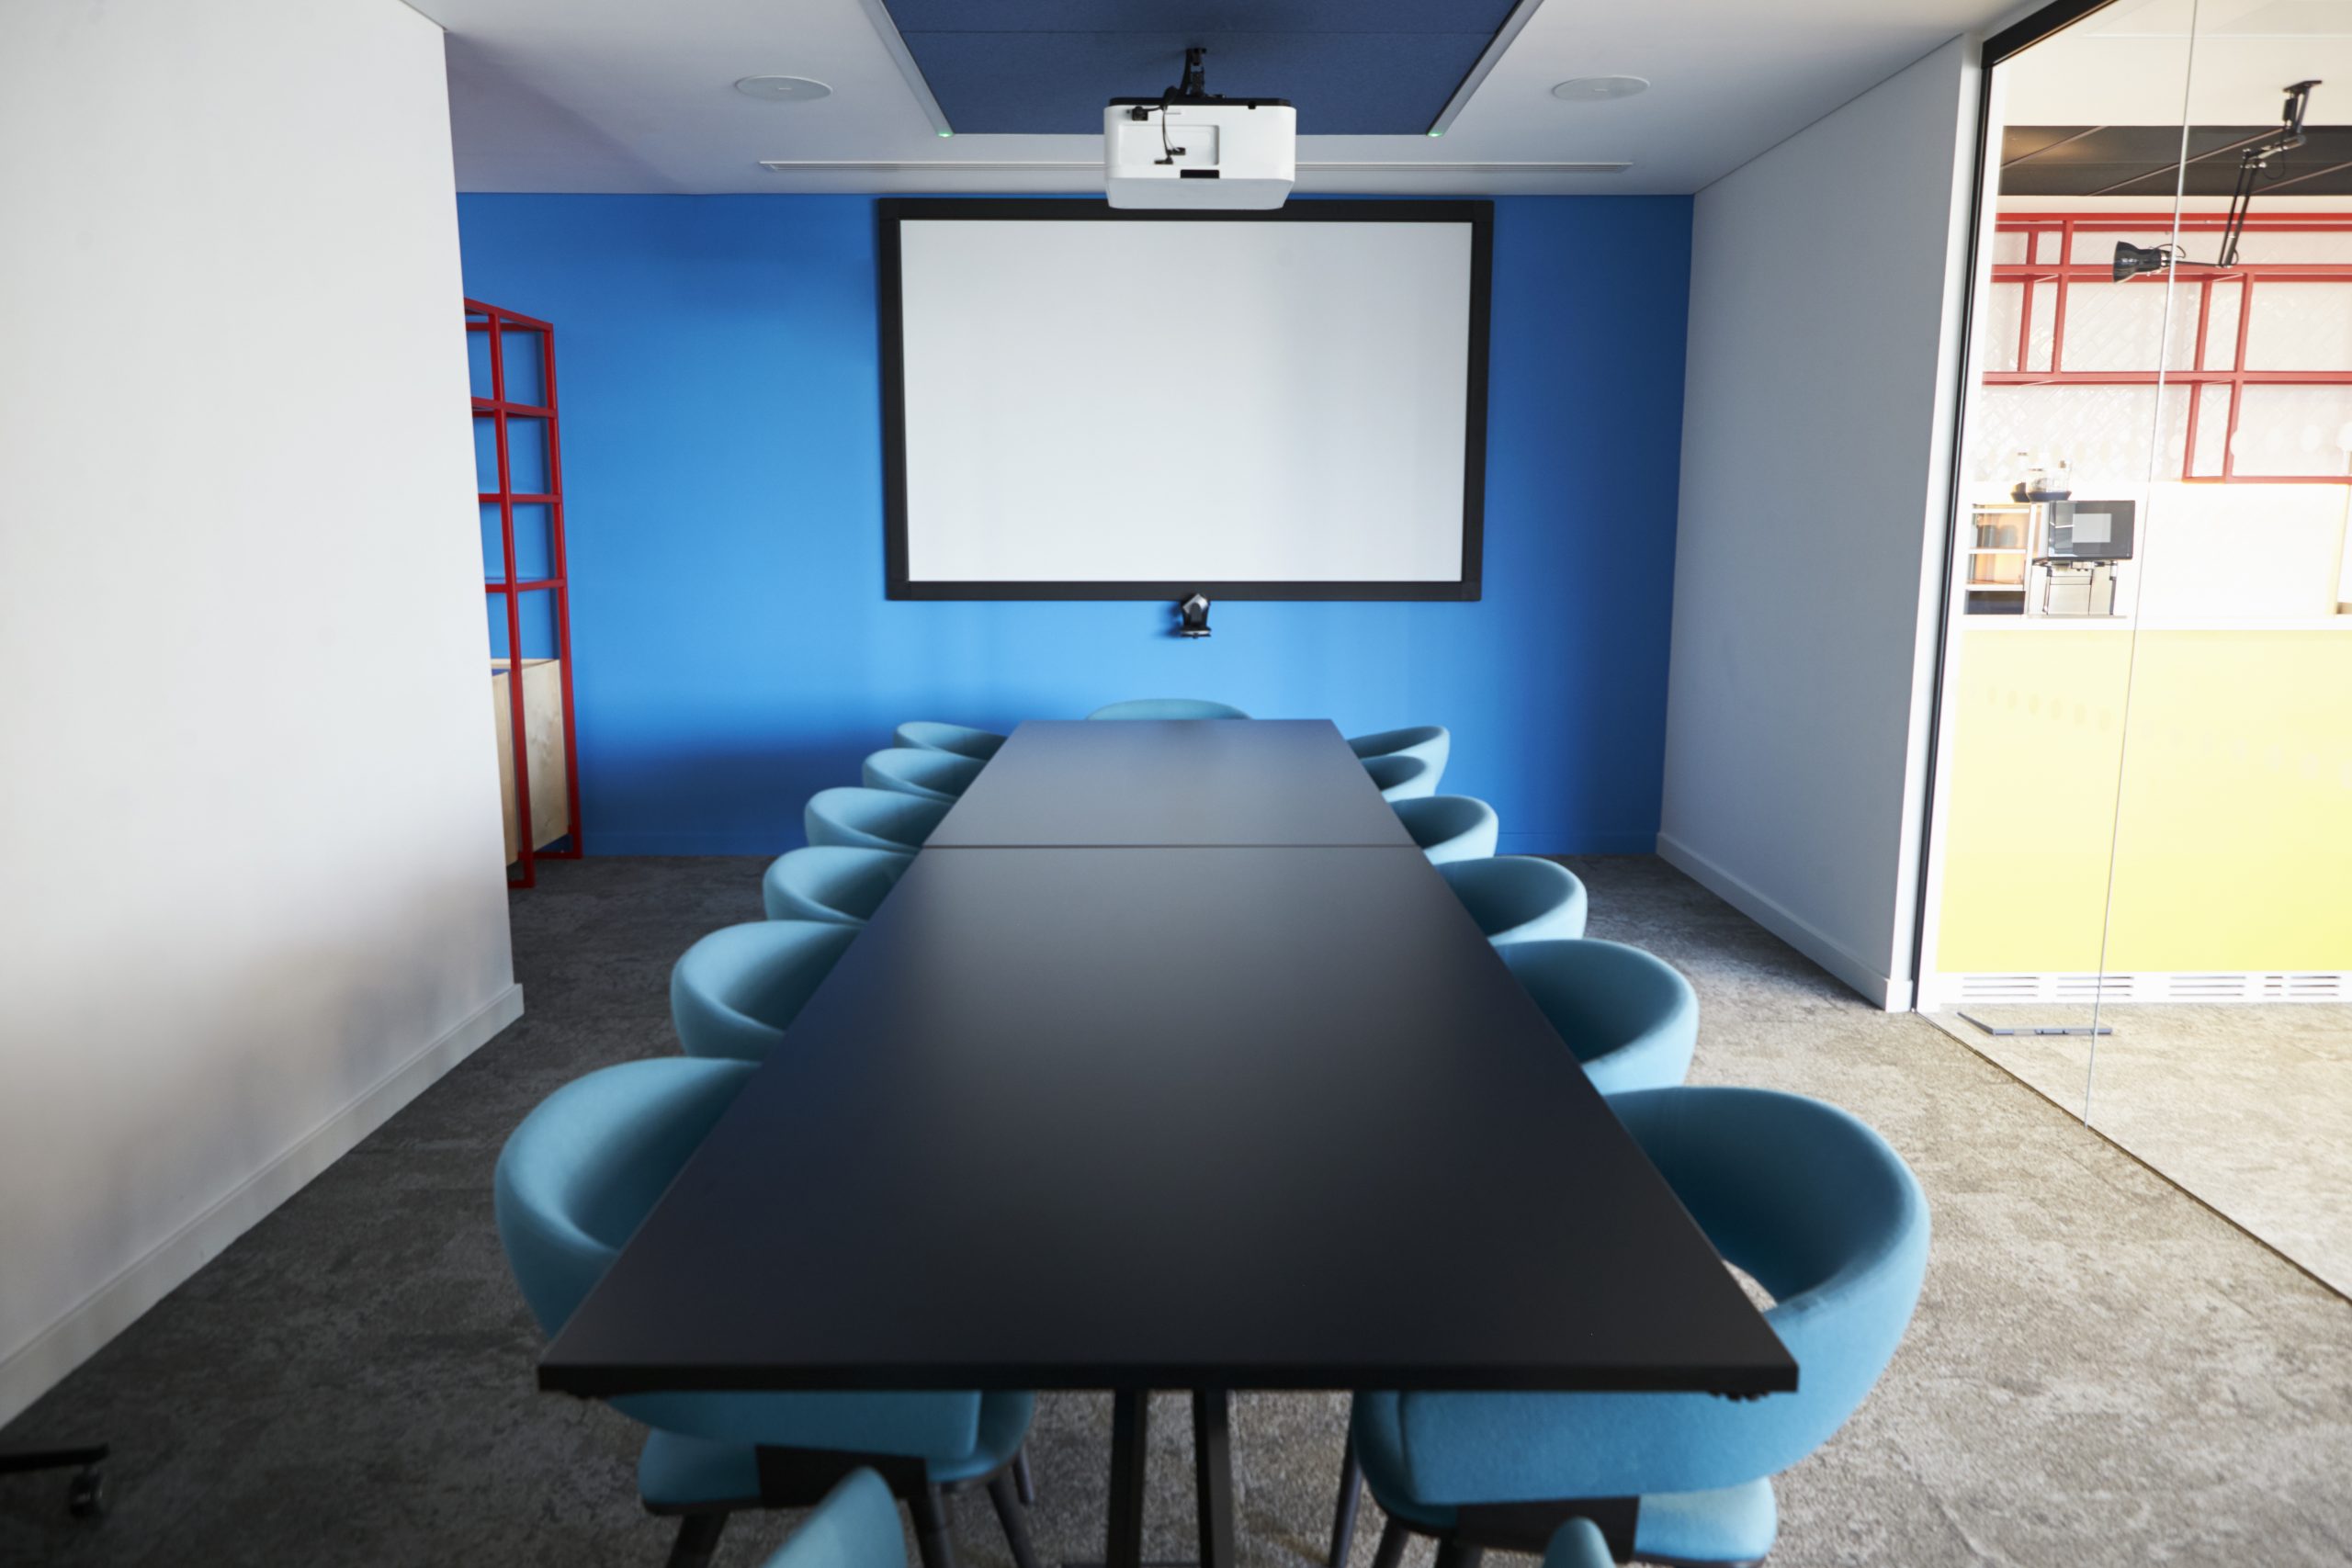 Flexible meeting spaces that provide great audio with video conferencing are a must in the hybrid workplace.